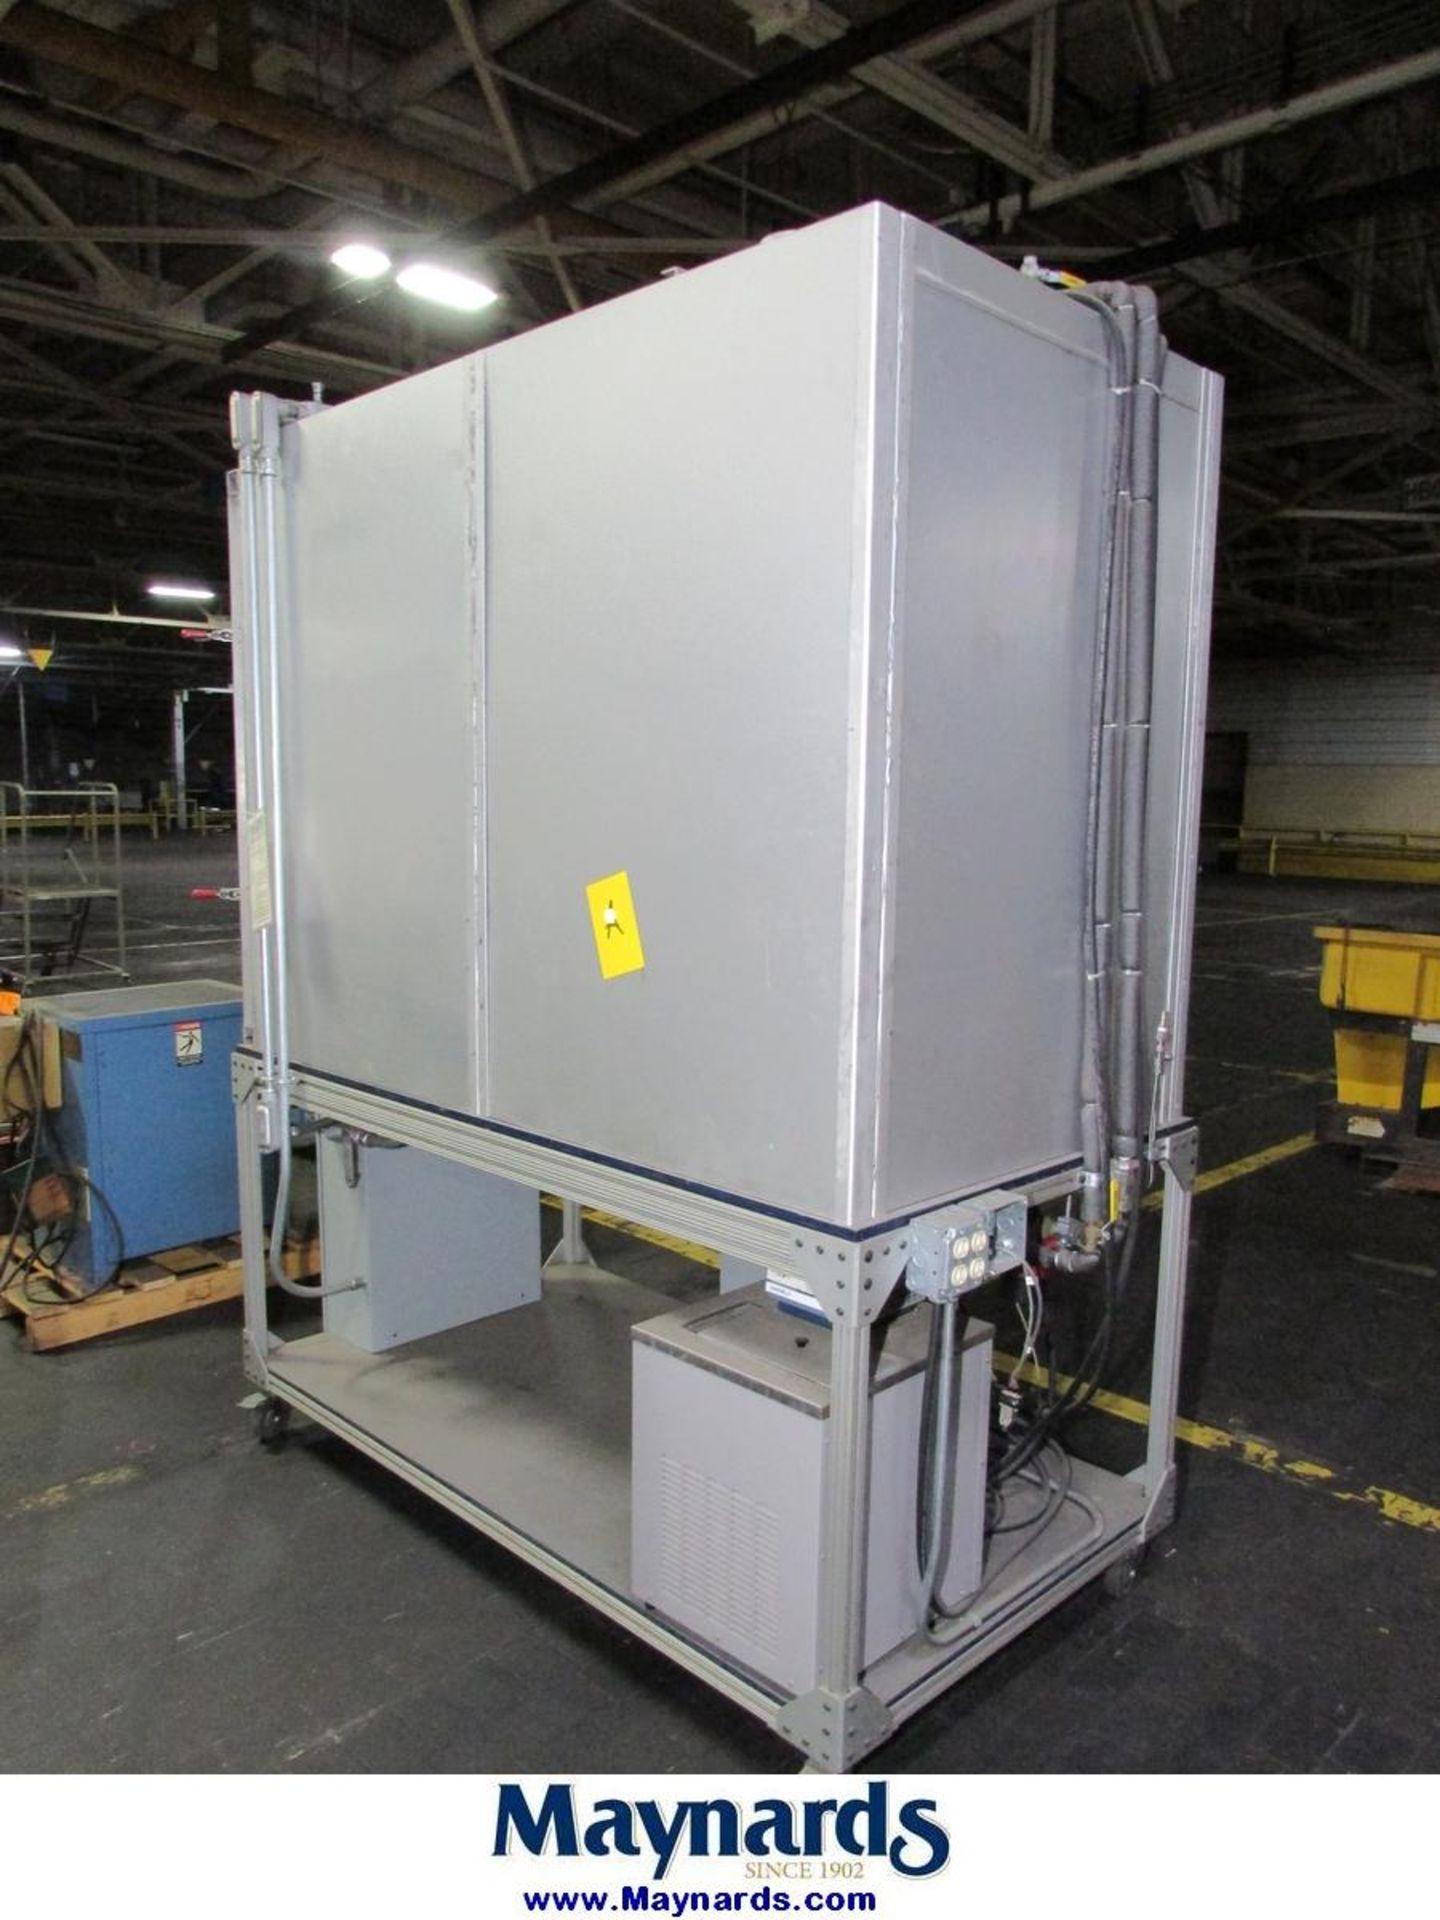 APS Mini-SHED Fuel Evaporation Lab Test Chamber - Image 6 of 9